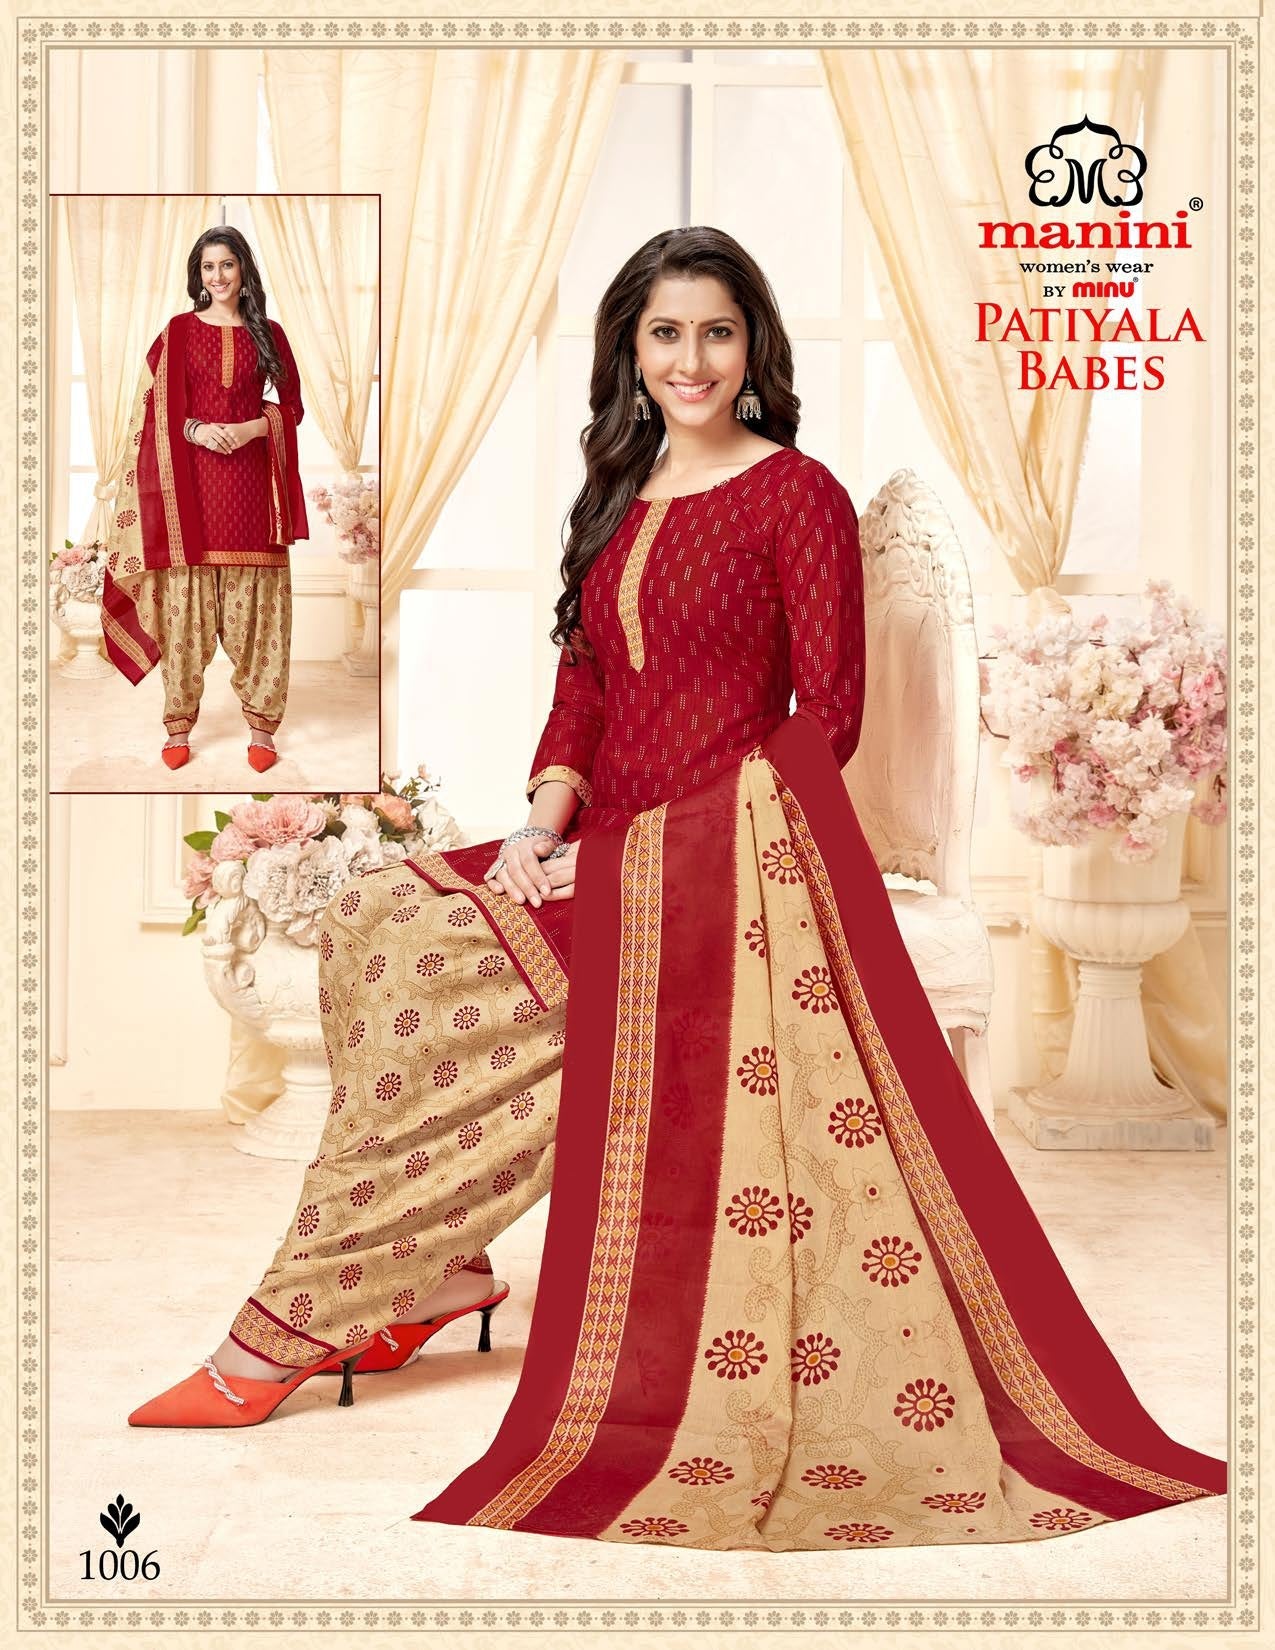 woman wearing salwar suits from ladies suit manufacturer